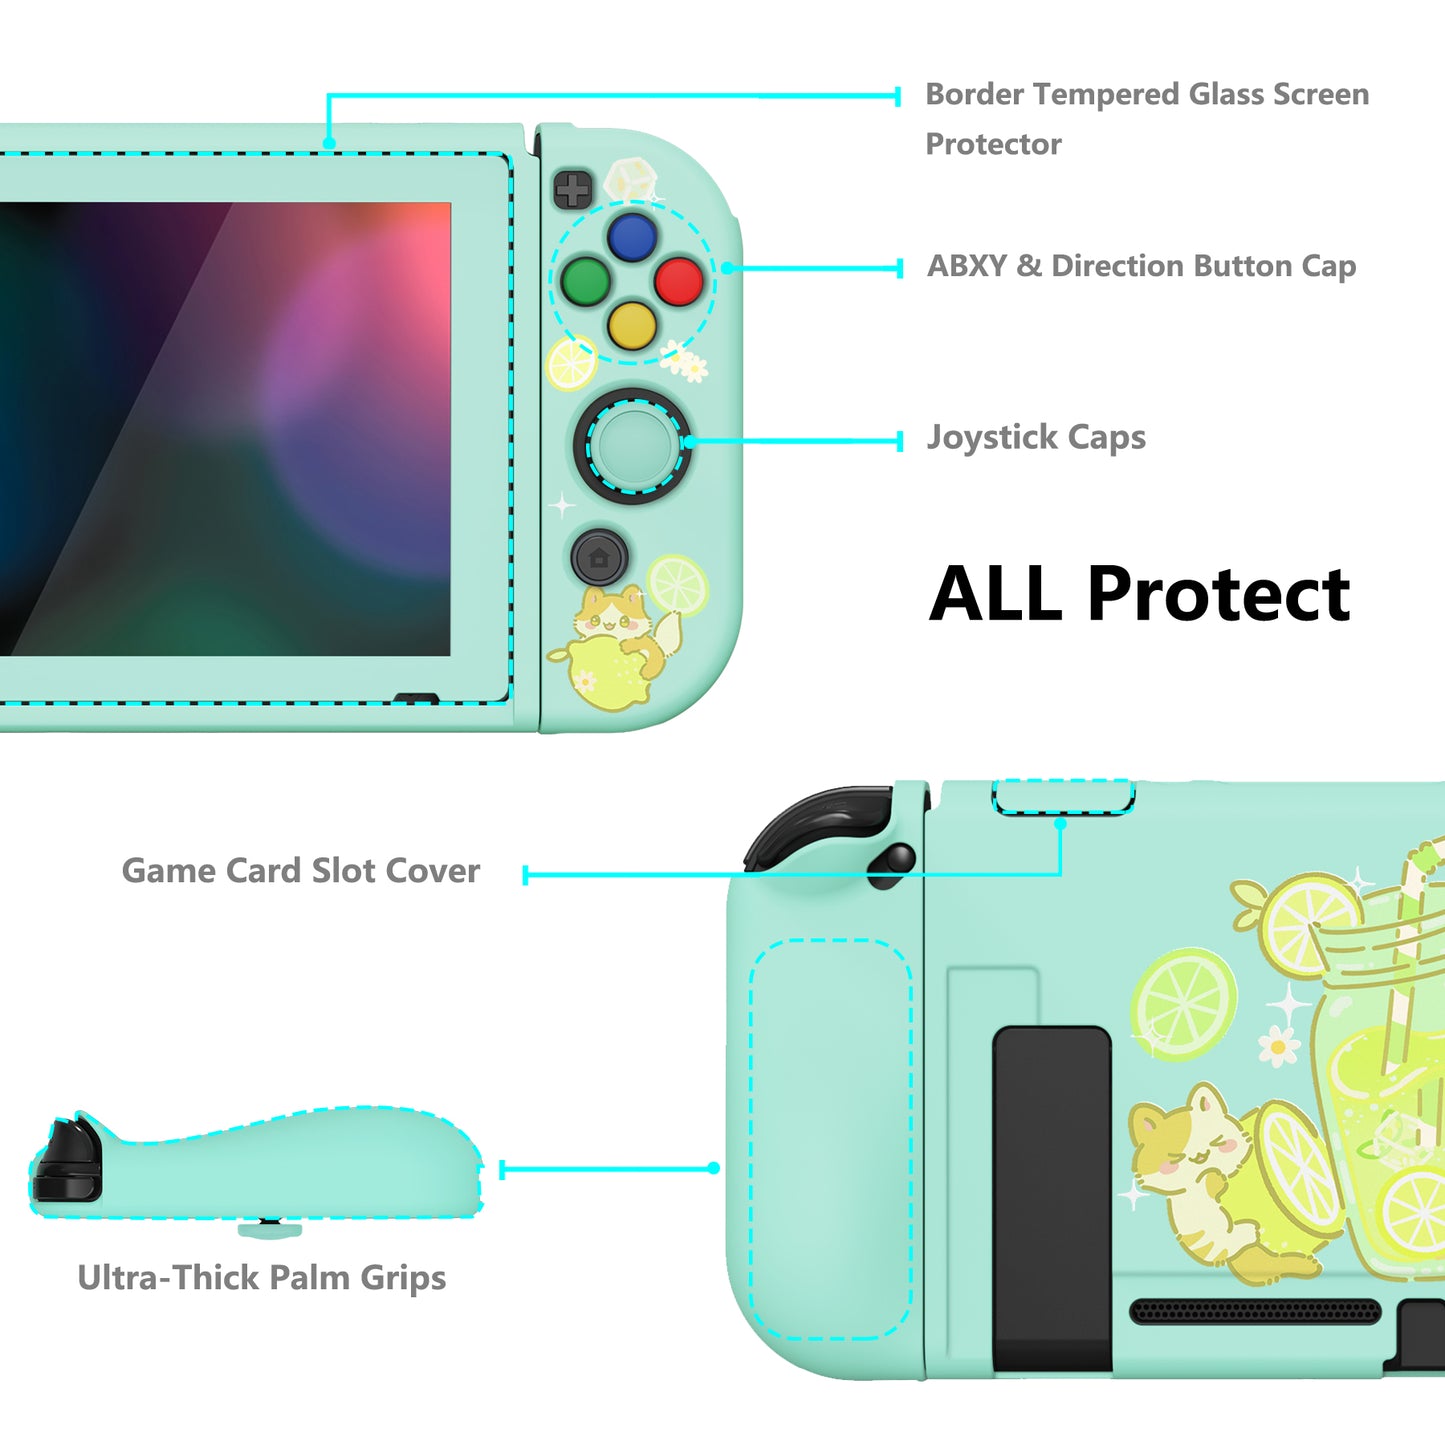 PlayVital ZealProtect Soft Protective Case for Nintendo Switch, Flexible Cover for Switch with Tempered Glass Screen Protector & Thumb Grips & ABXY Direction Button Caps - Lemonade Kitty - RNSYV6046 playvital